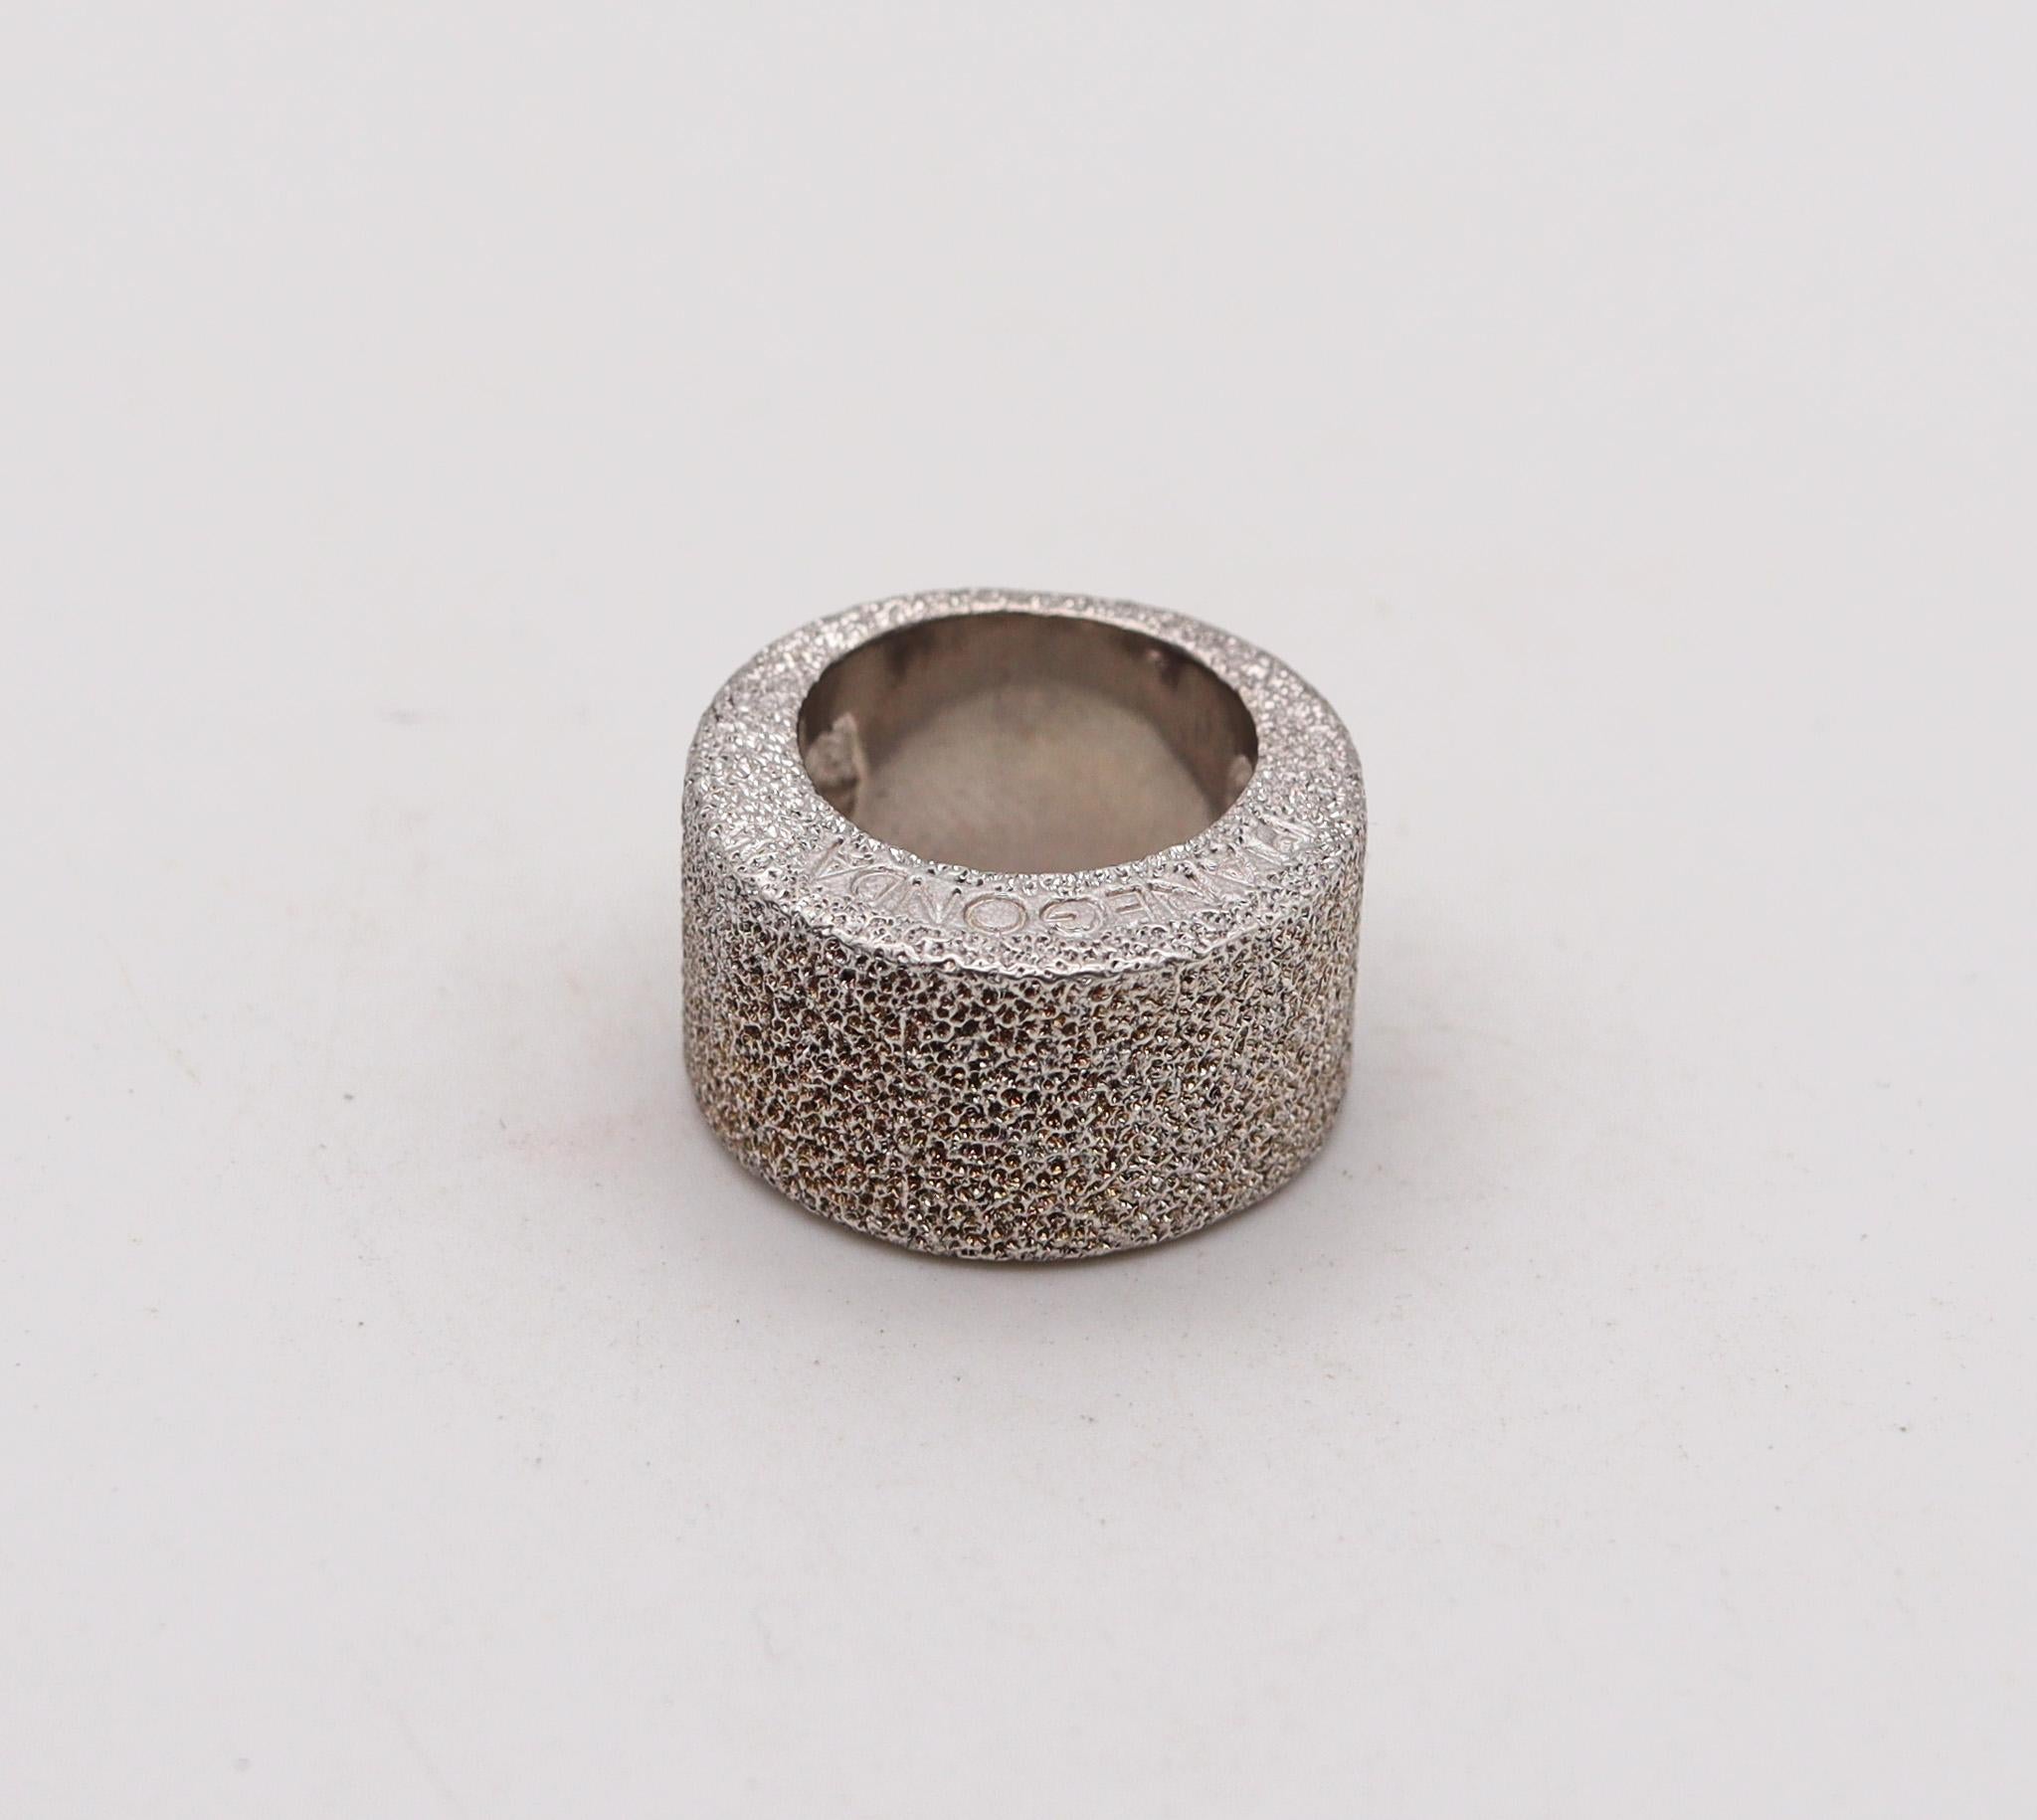 A textured band ring designed by Franco Pianegonta.

An unusual modernist band ring, created in Vicenza Italy by the jewelry house of Pianegonta. This ring has been crafted in solid .925/.999 sterling silver with textured finish. The jewelry pieces